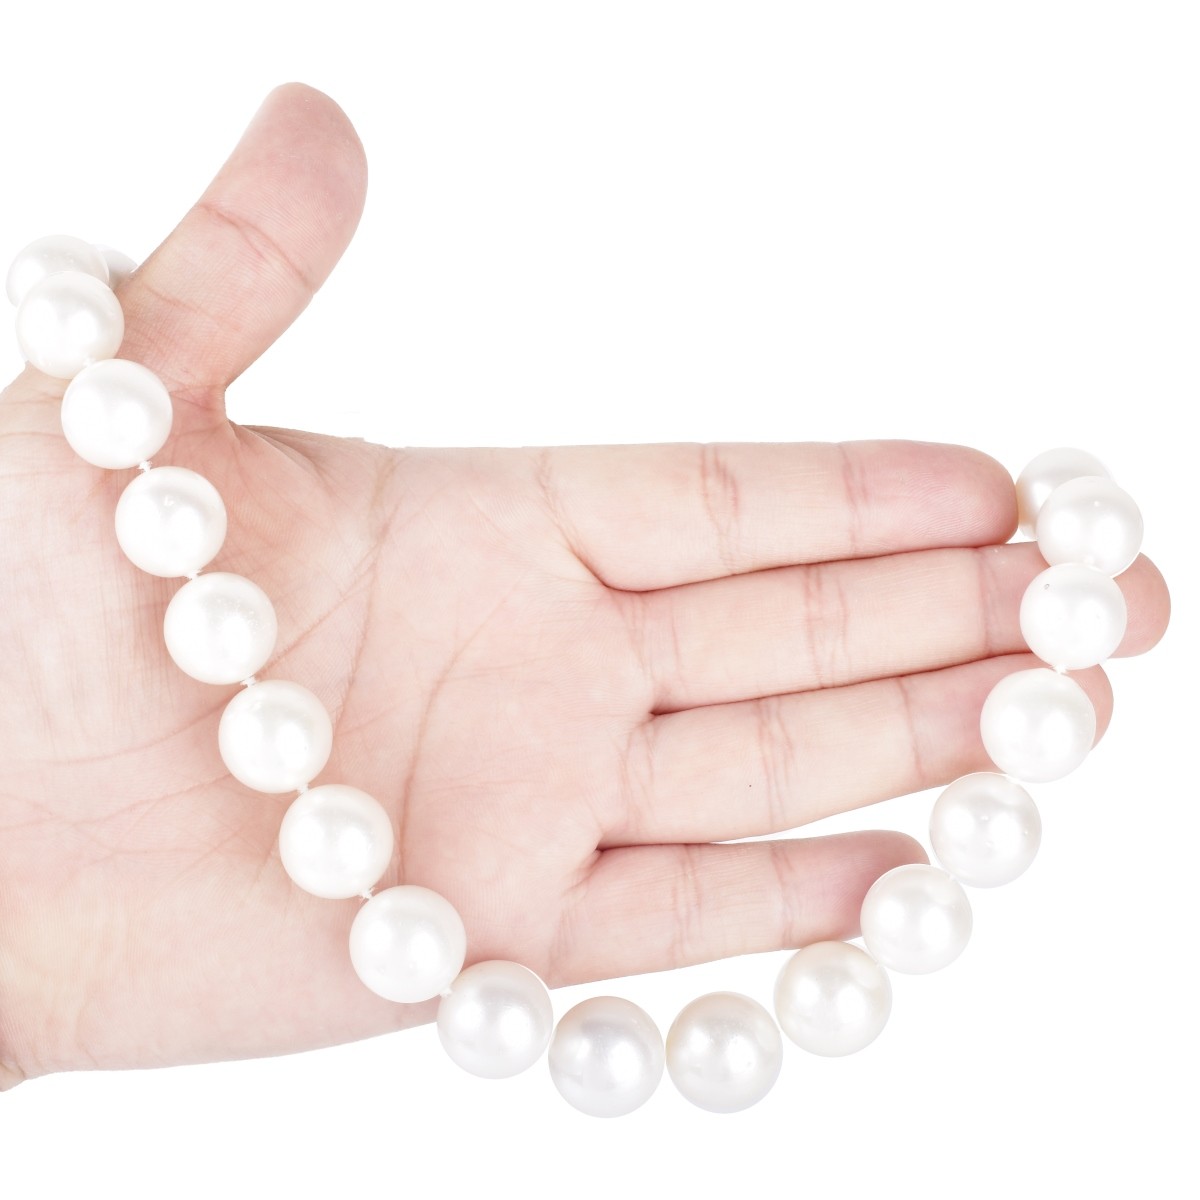 18.0-15.0mm South Sea Pearl Necklace - Image 5 of 5